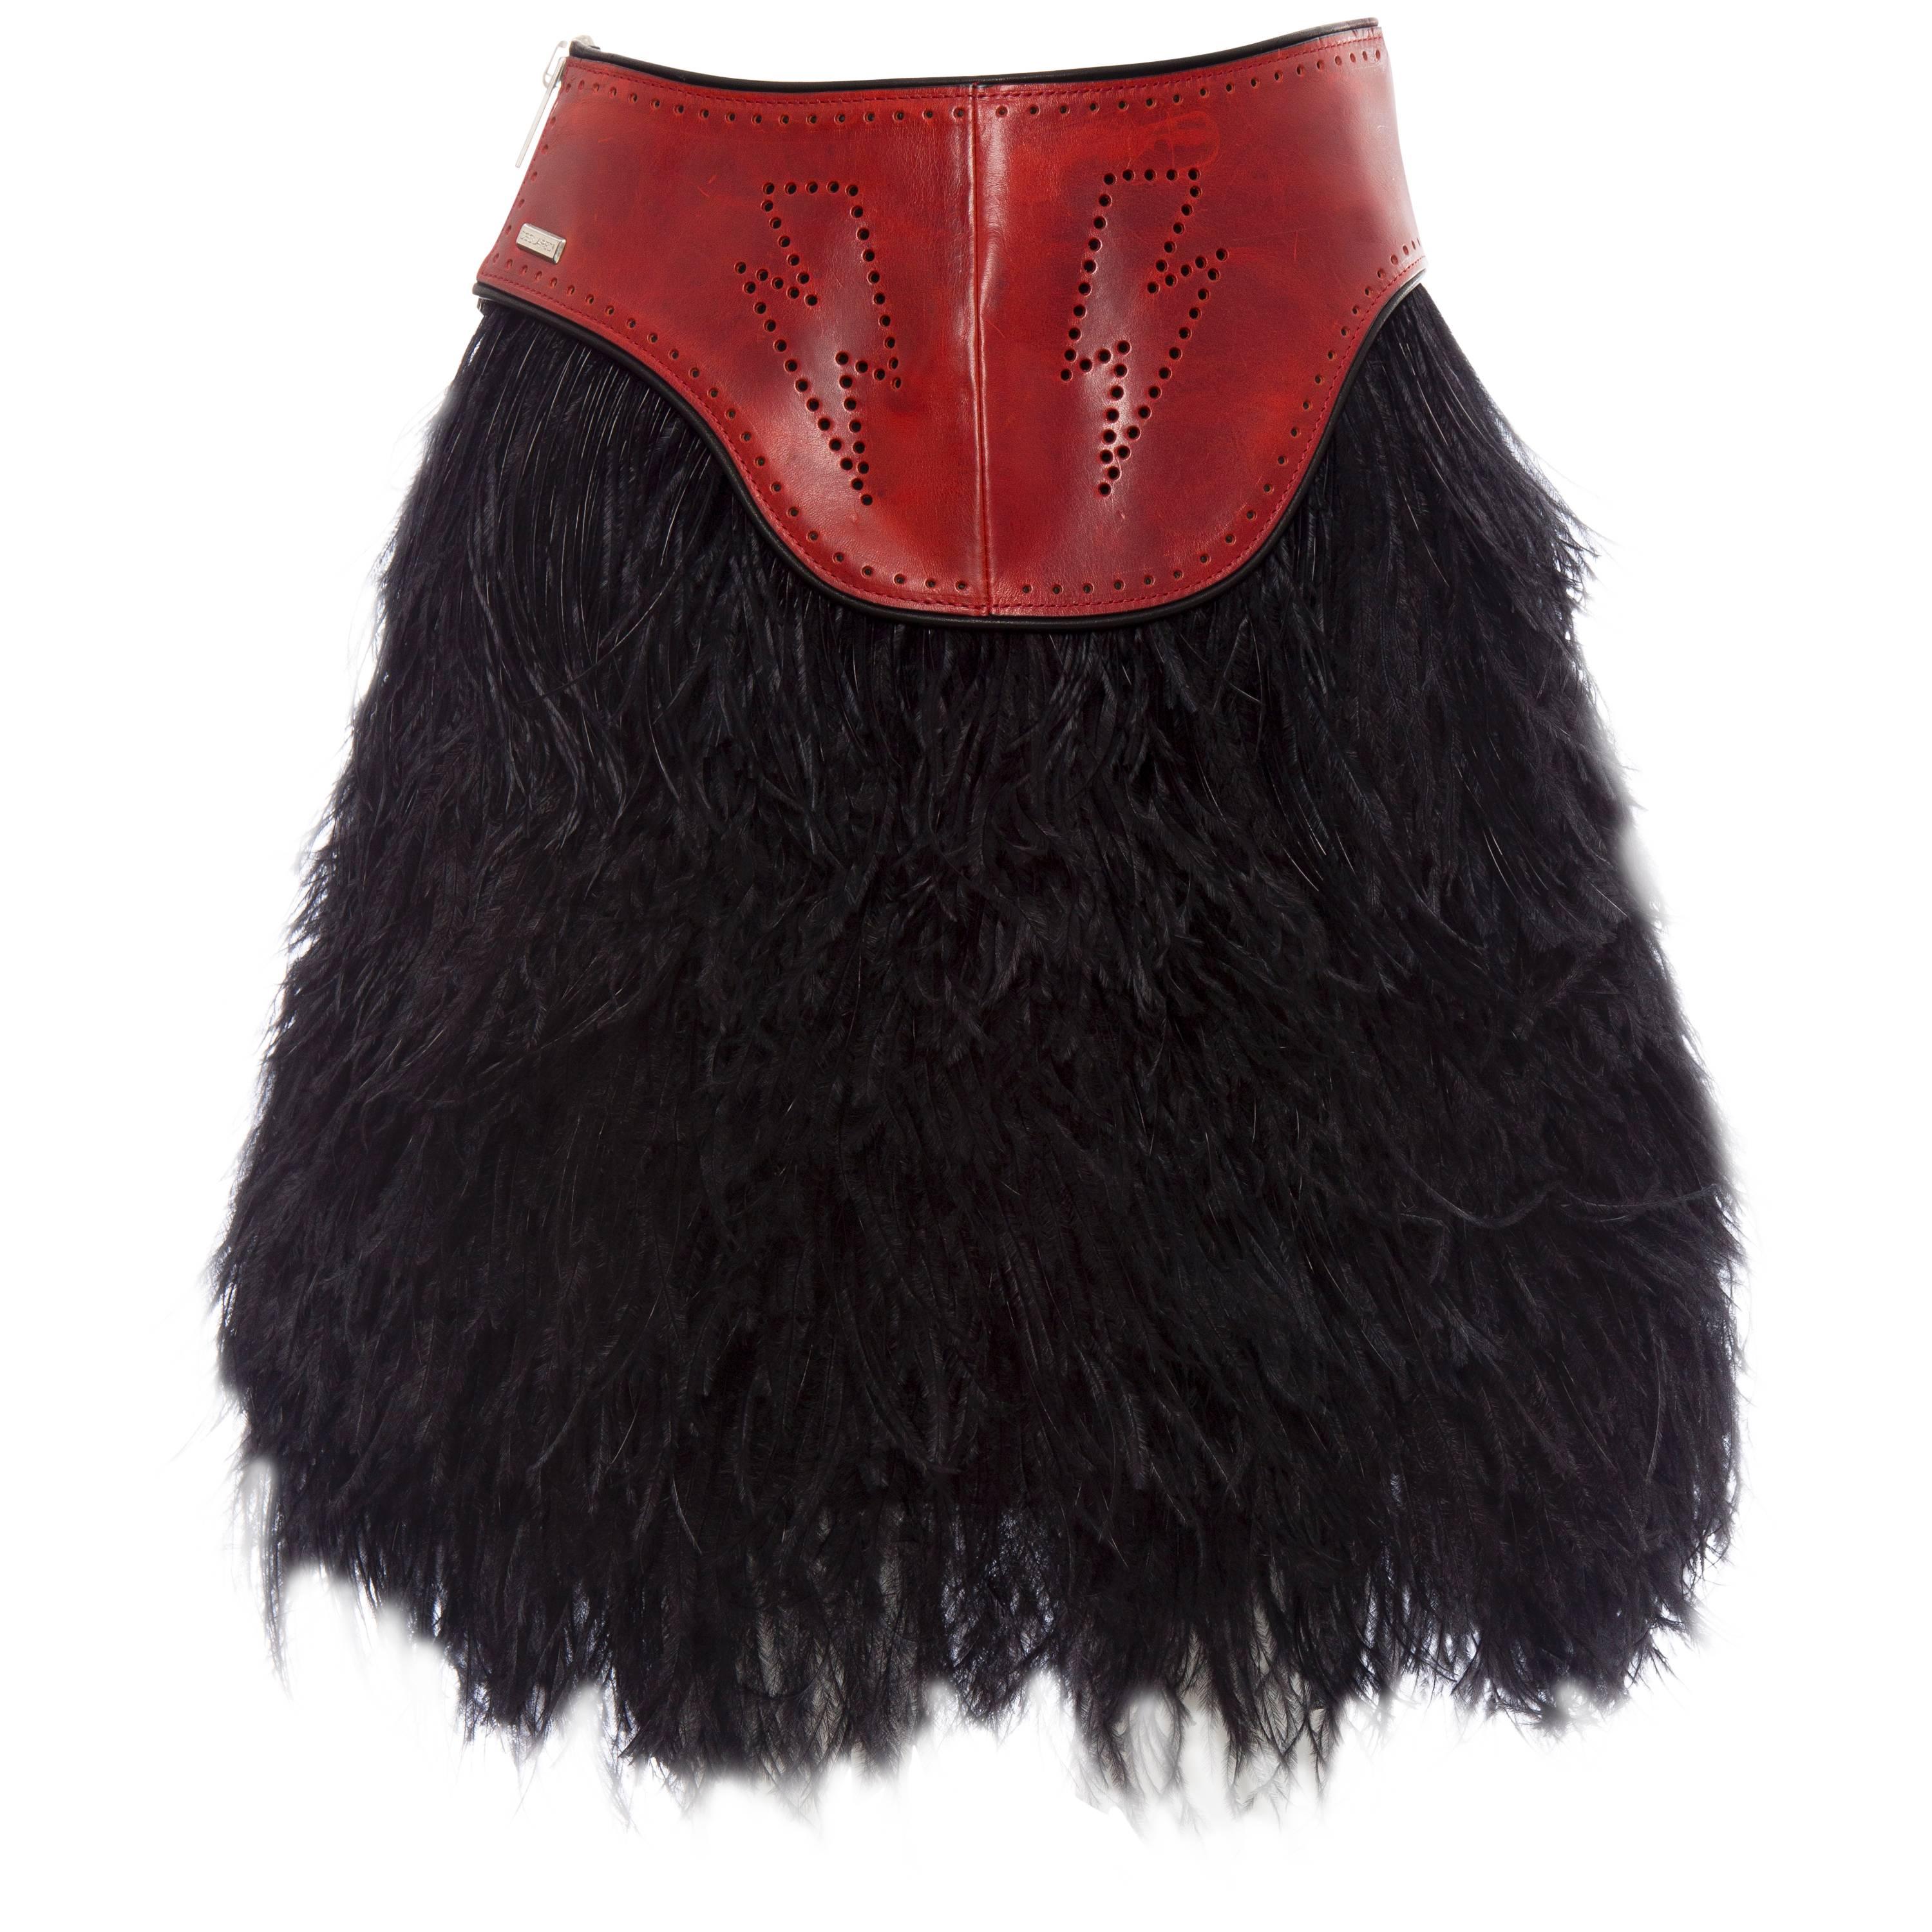 Dsquared2 Ostrich Feather Skirt With Red Perforated Leather Waist, Fall 2008